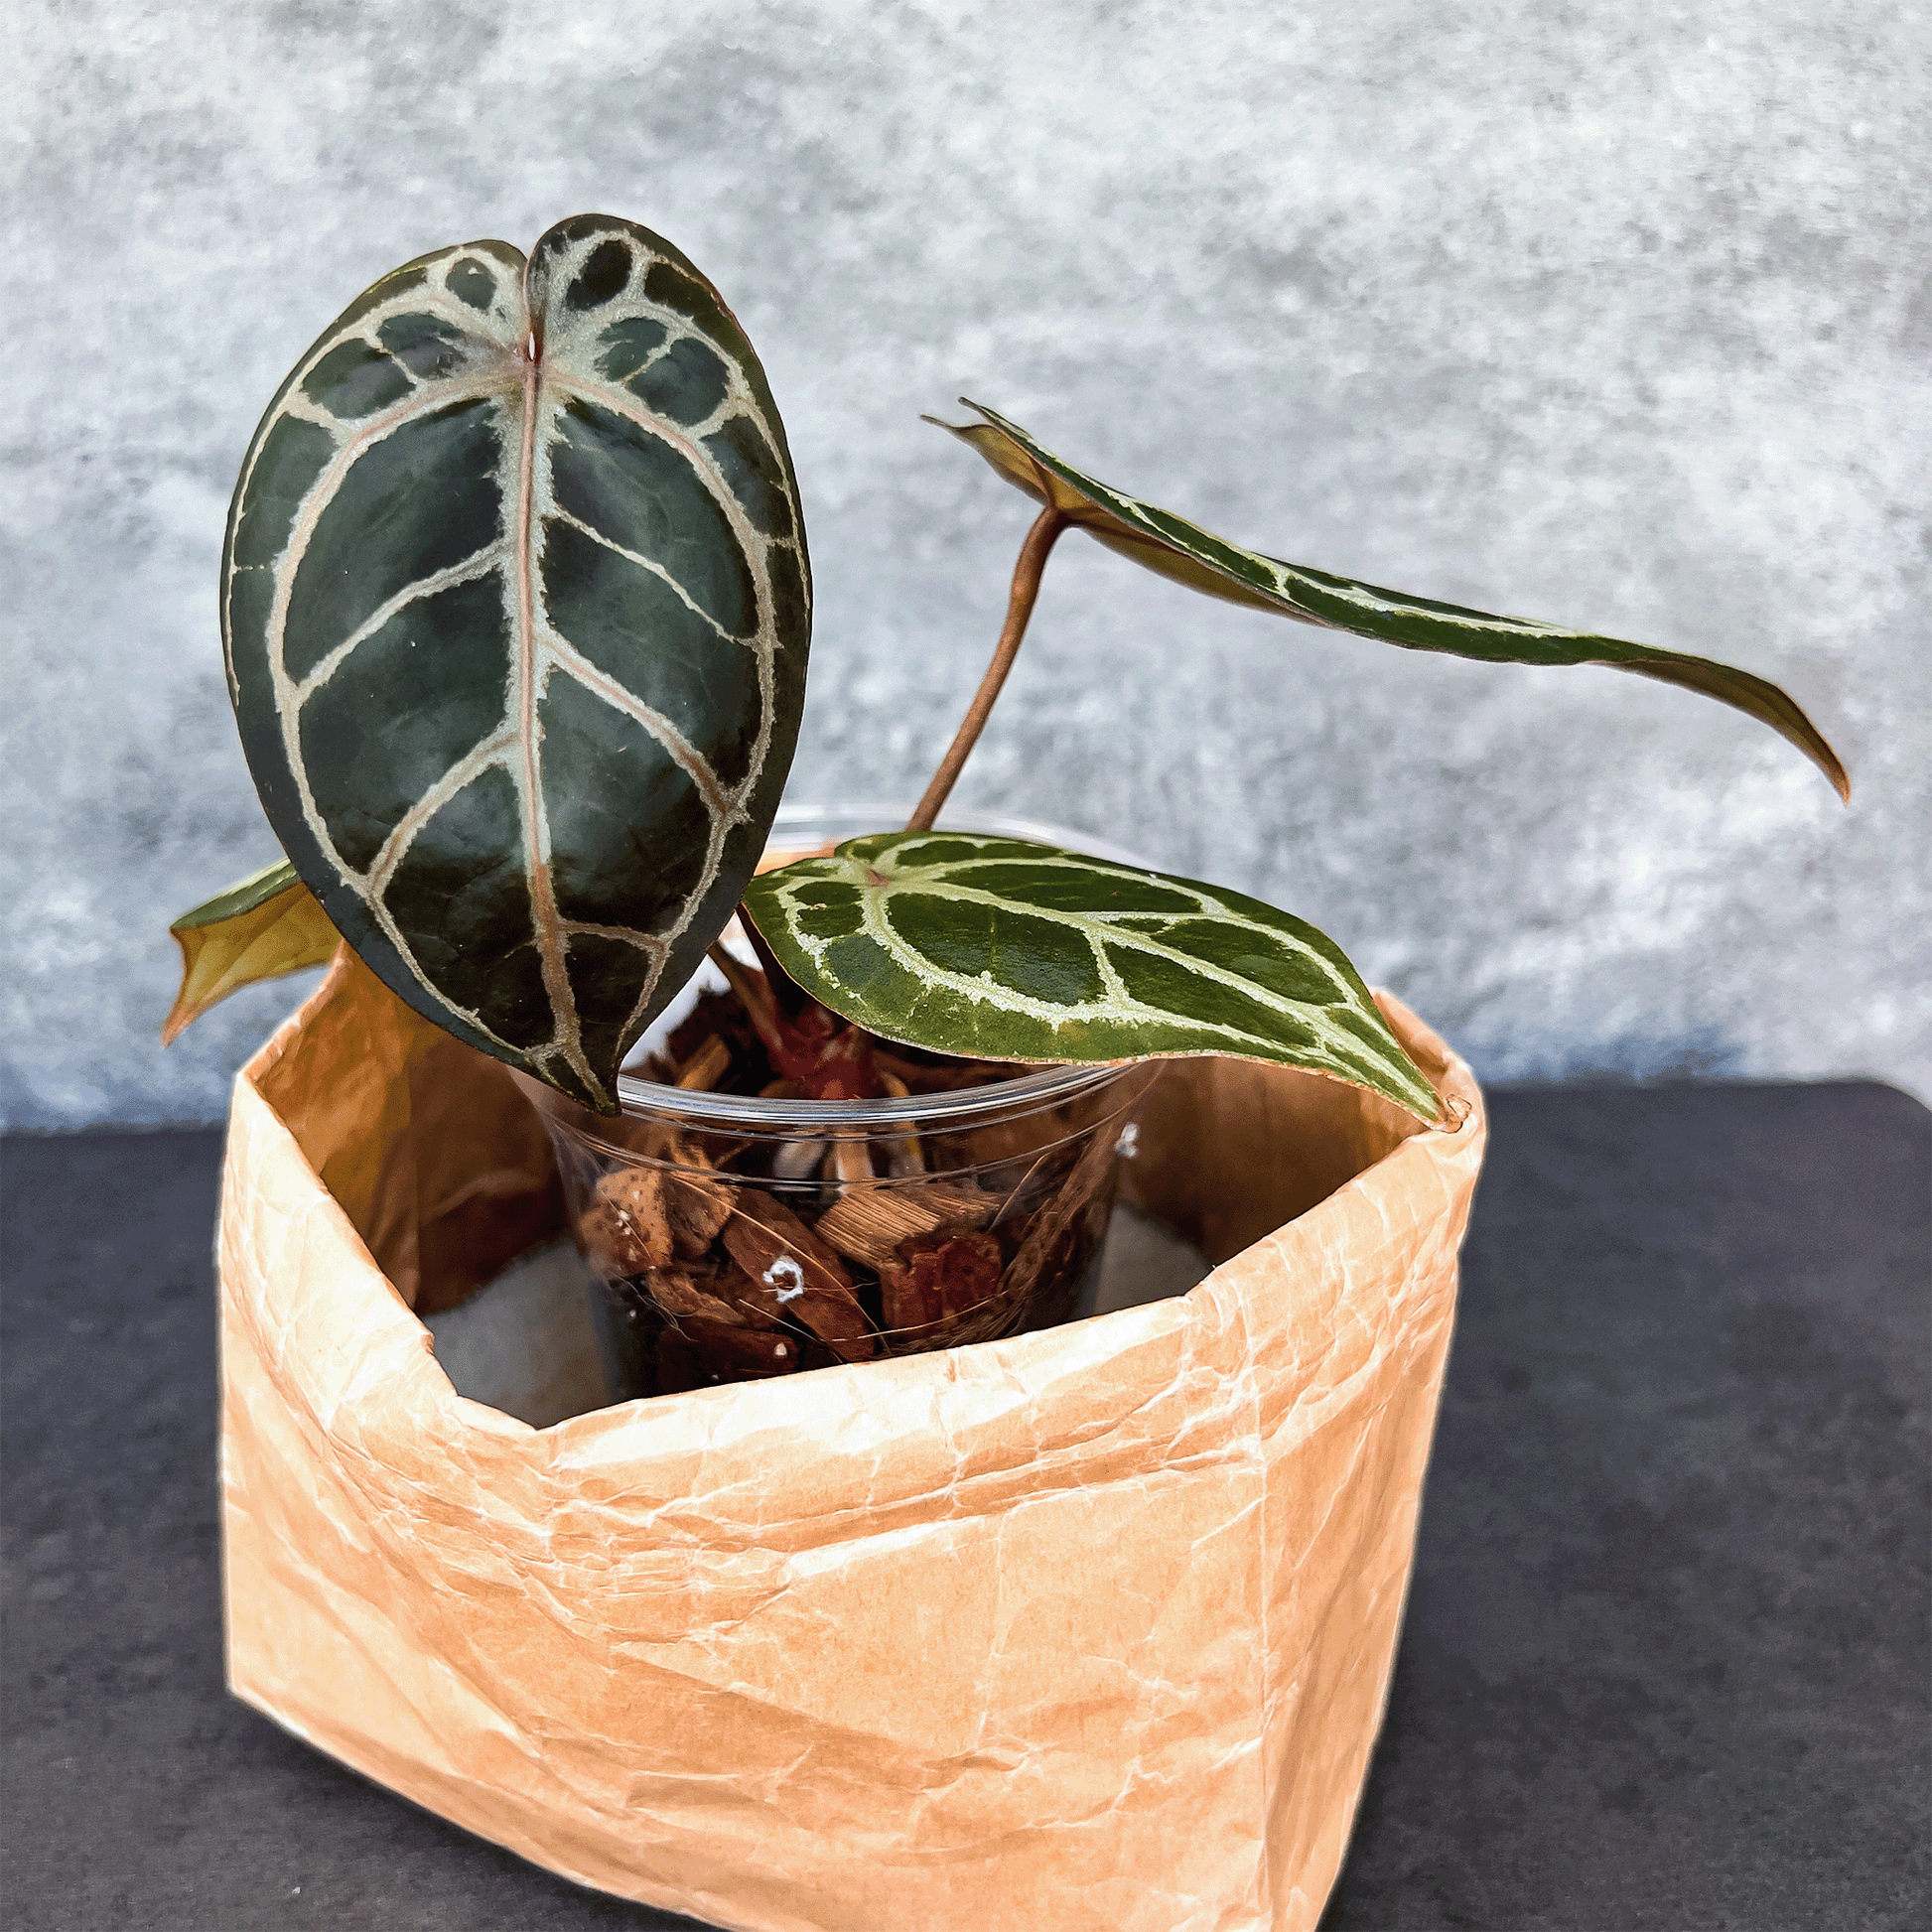 Anthurium King Of Spades x Red Crystallinum, by Mr, HU